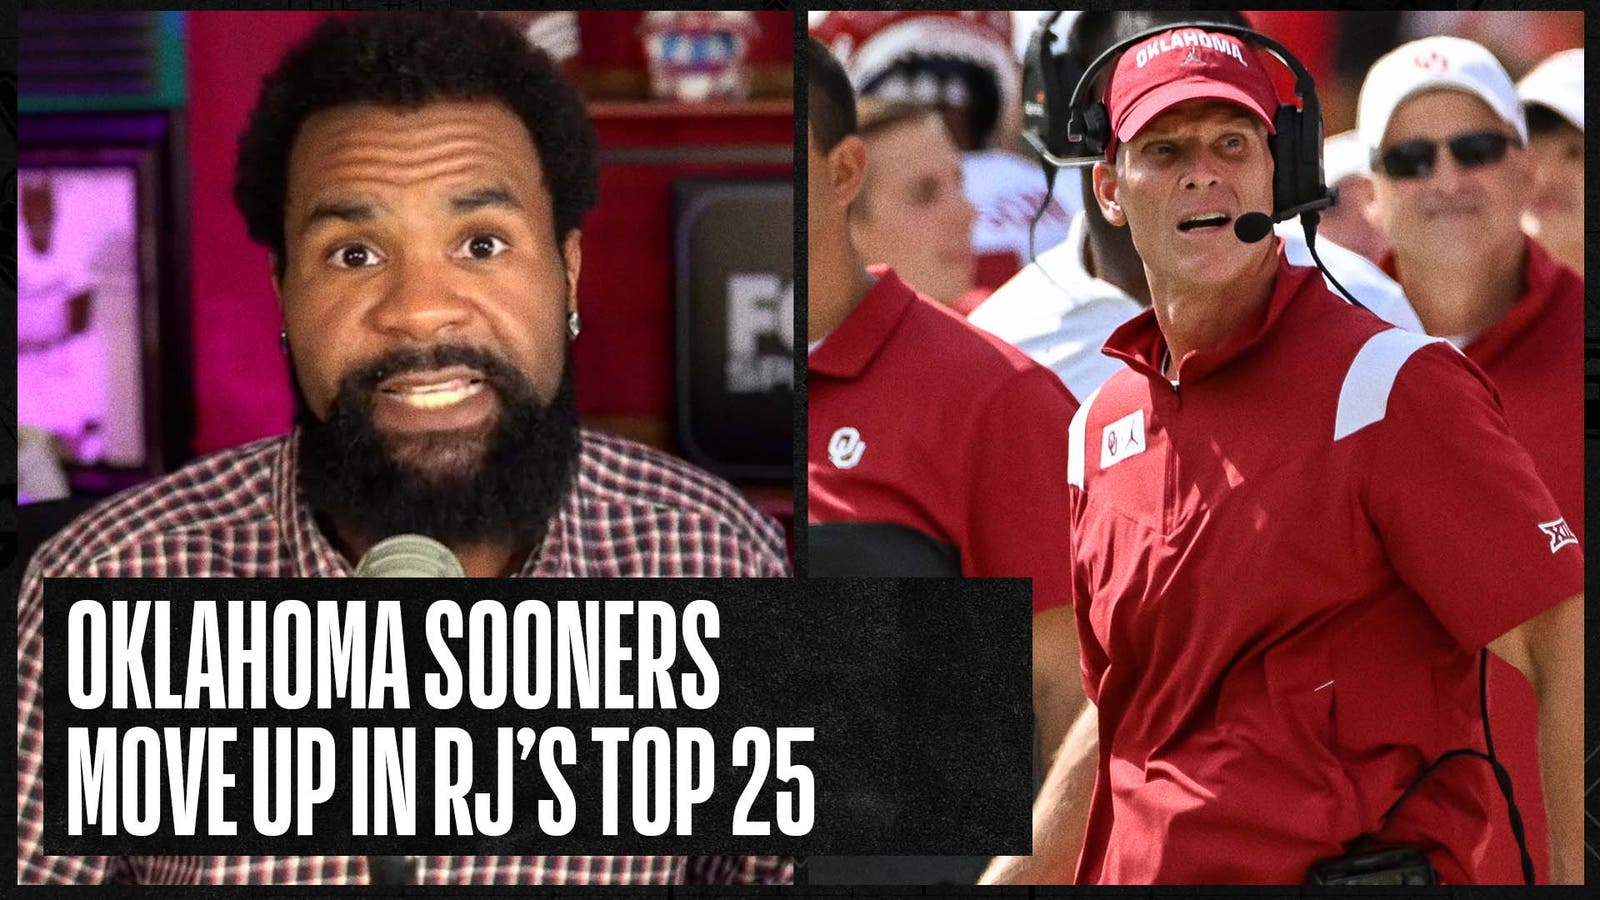 RJ Young's Top 25: Oklahoma moves up to No. 4